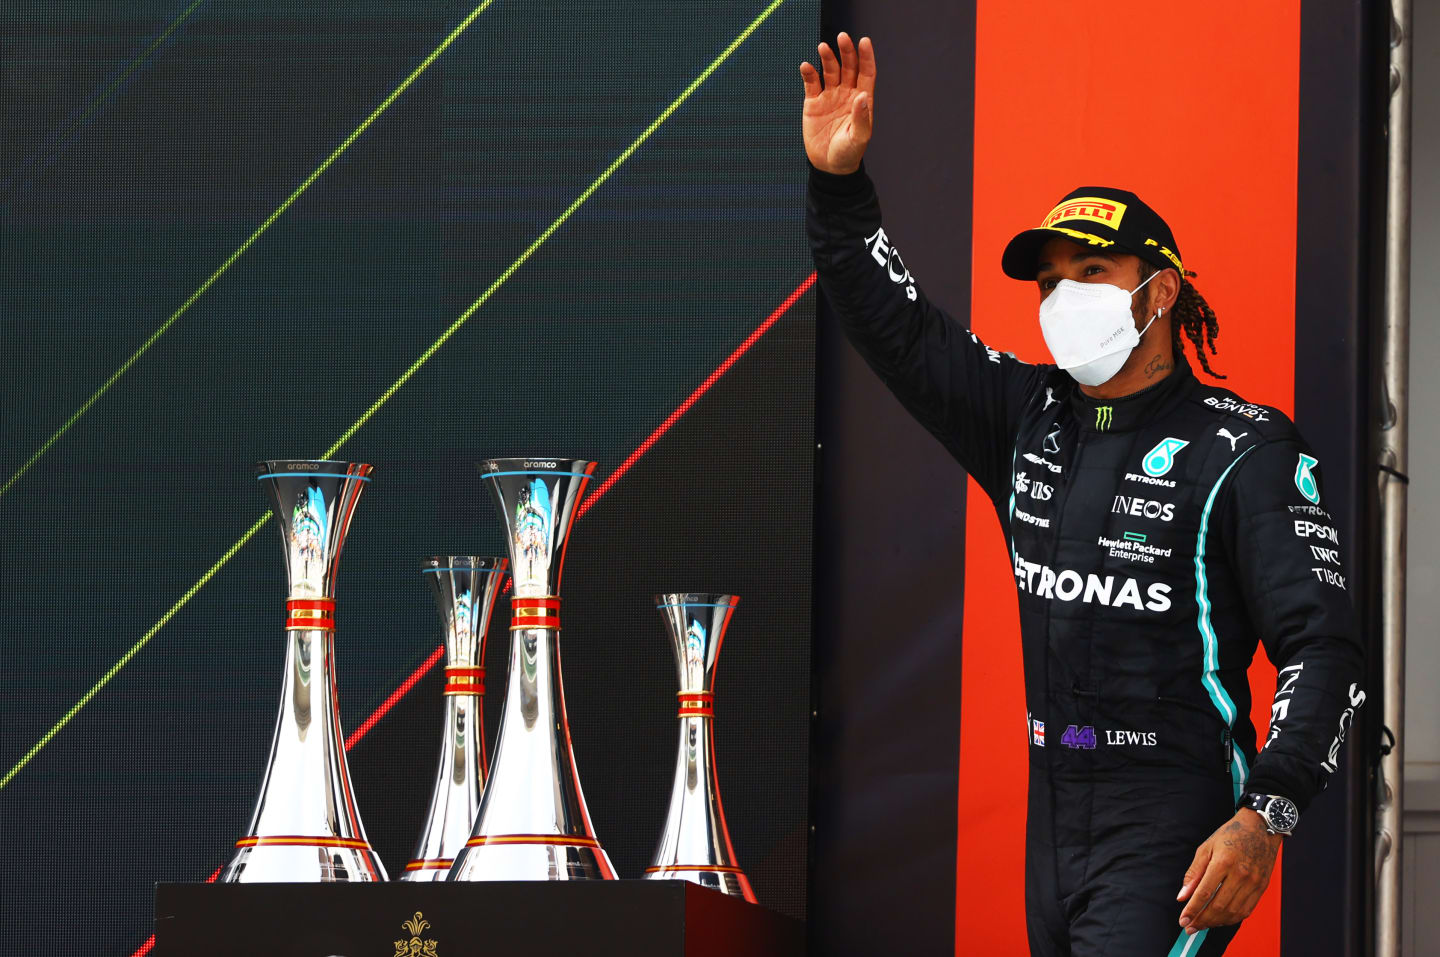 BARCELONA, SPAIN - MAY 09: Race winner Lewis Hamilton of Great Britain and Mercedes GP celebrates on the podium during the F1 Grand Prix of Spain at Circuit de Barcelona-Catalunya on May 09, 2021 in Barcelona, Spain. (Photo by Bryn Lennon/Getty Images)